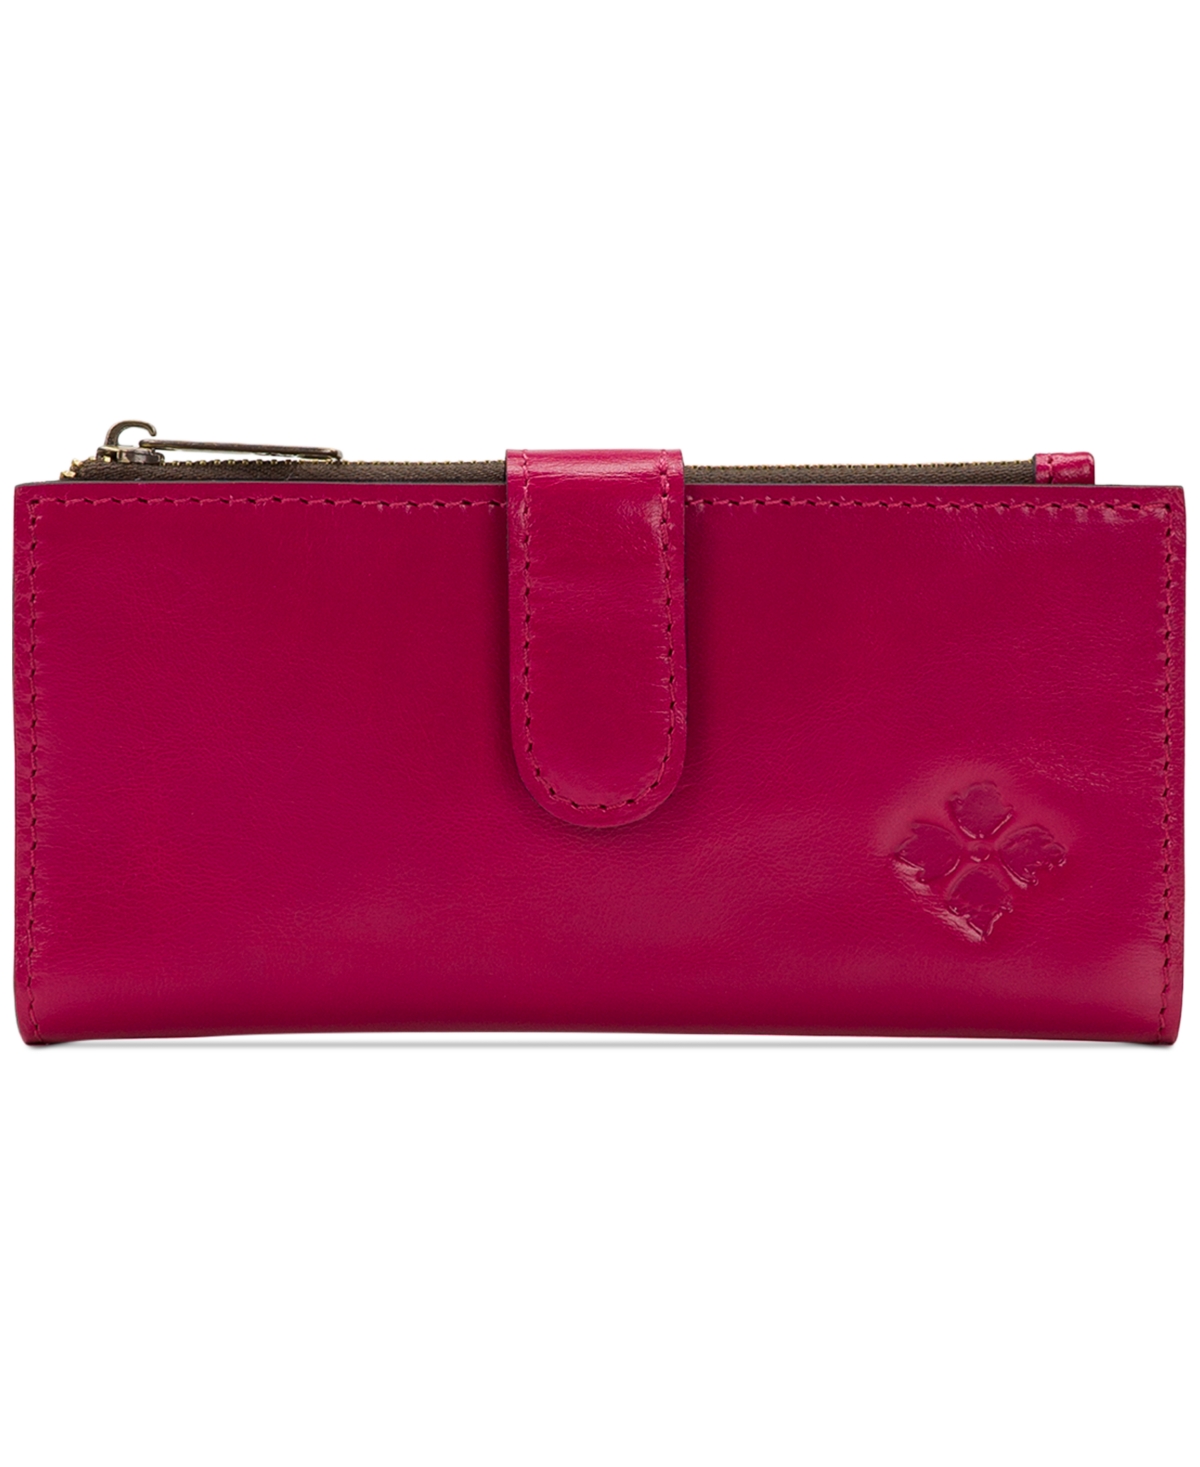 Patricia Nash Nazari Leather Wallet In Red